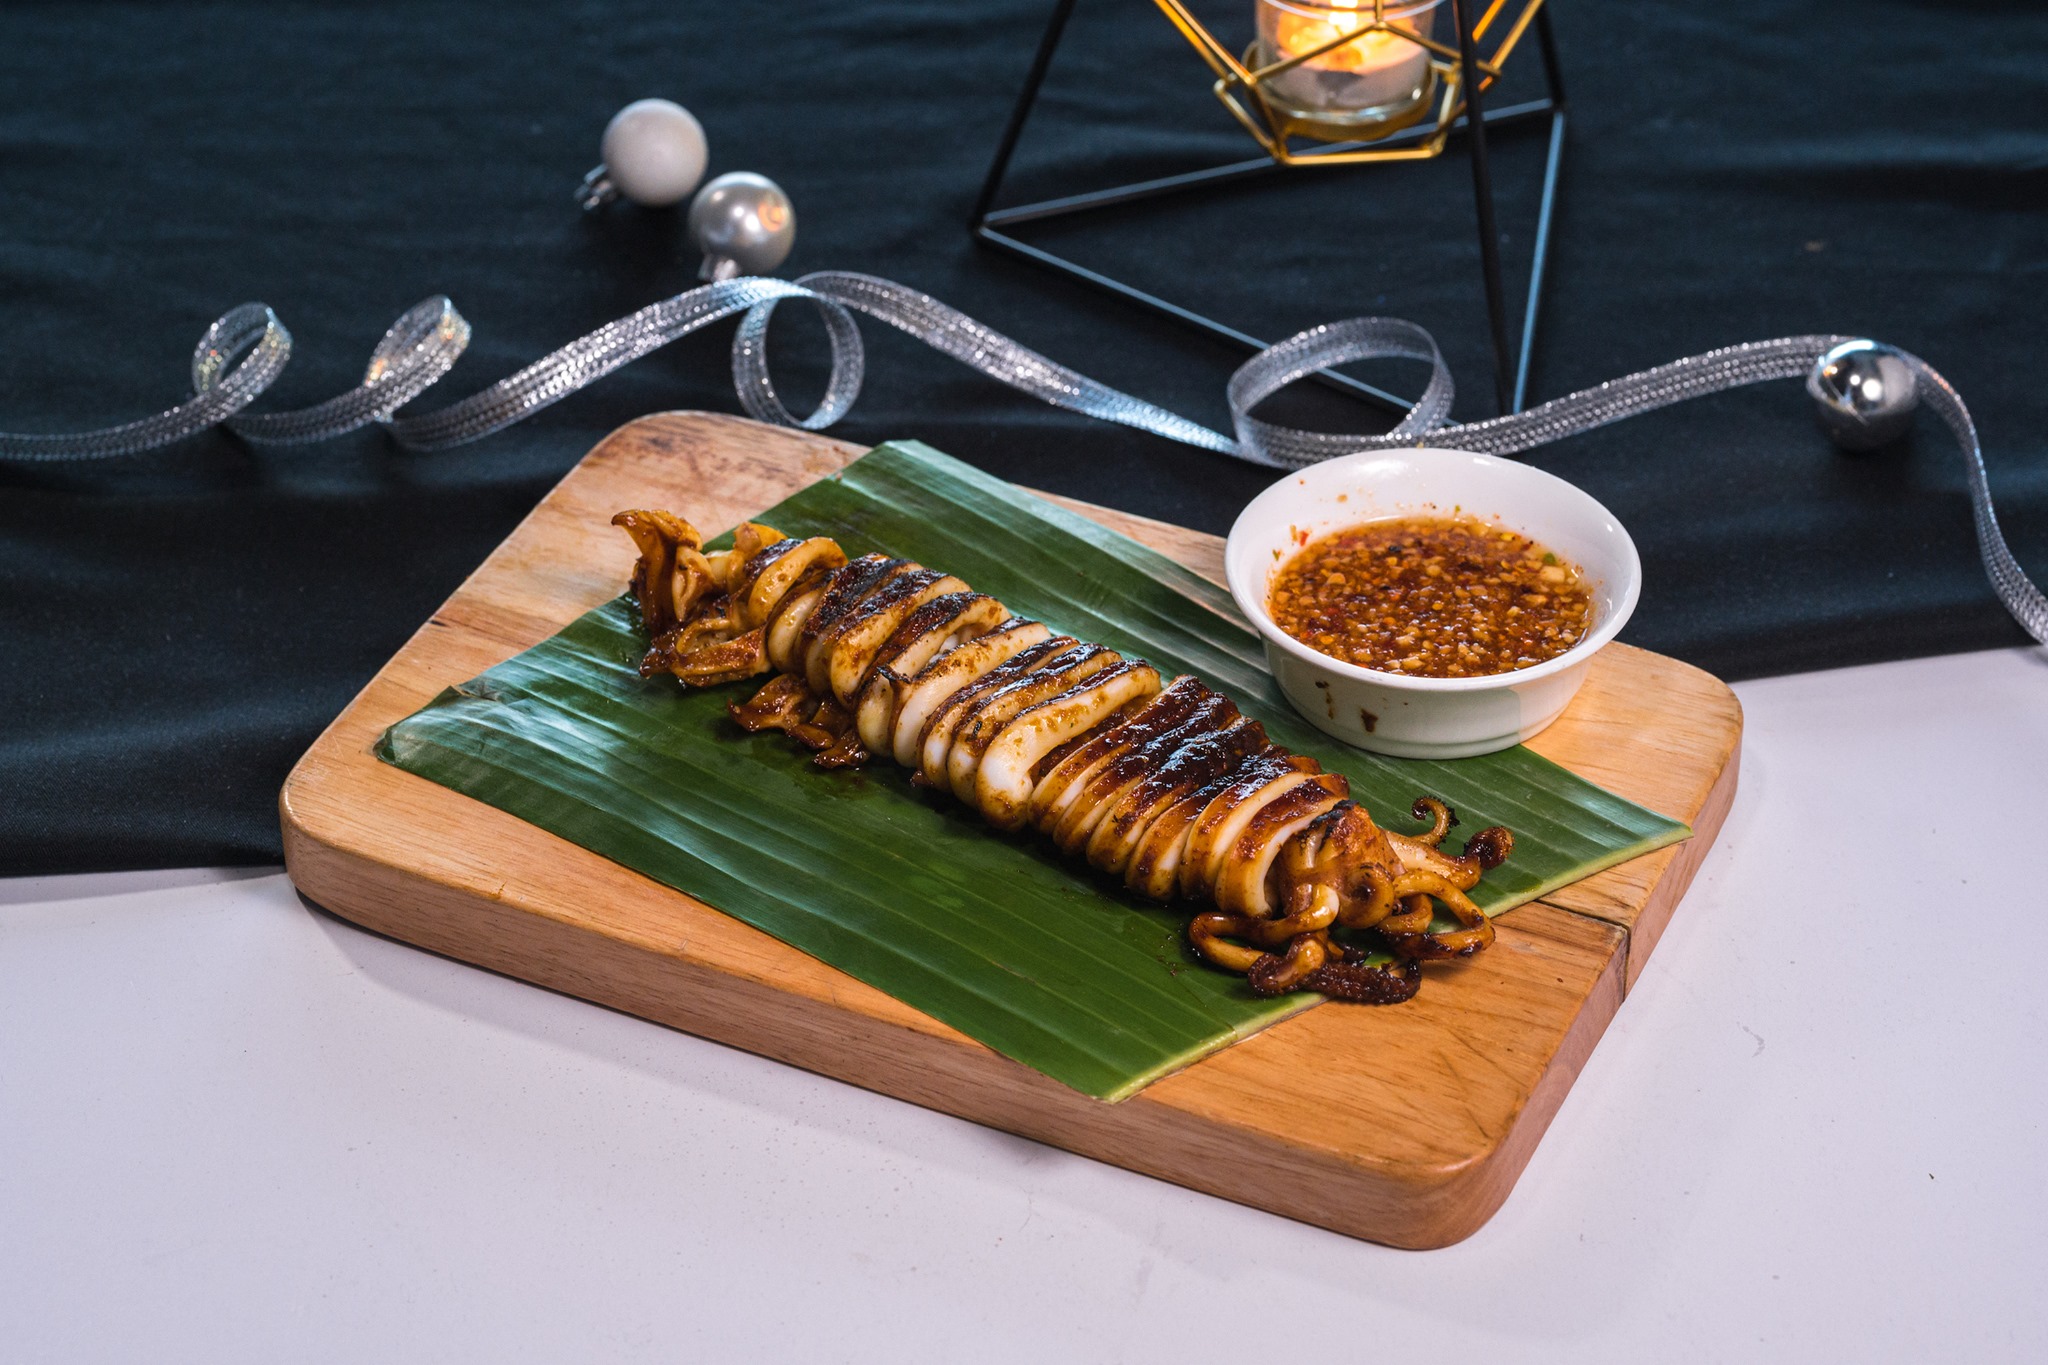 Chargrilled Squid with Spicy Tangy Sauce - this chargrilled giant squid will “WOW” you at first glance. Served with traditional seafood sauce topped with grounded peanuts. Perfect for sharing!  #GreyhoundCafeHK #GreyhoundCafe #Thaifood #泰菜 